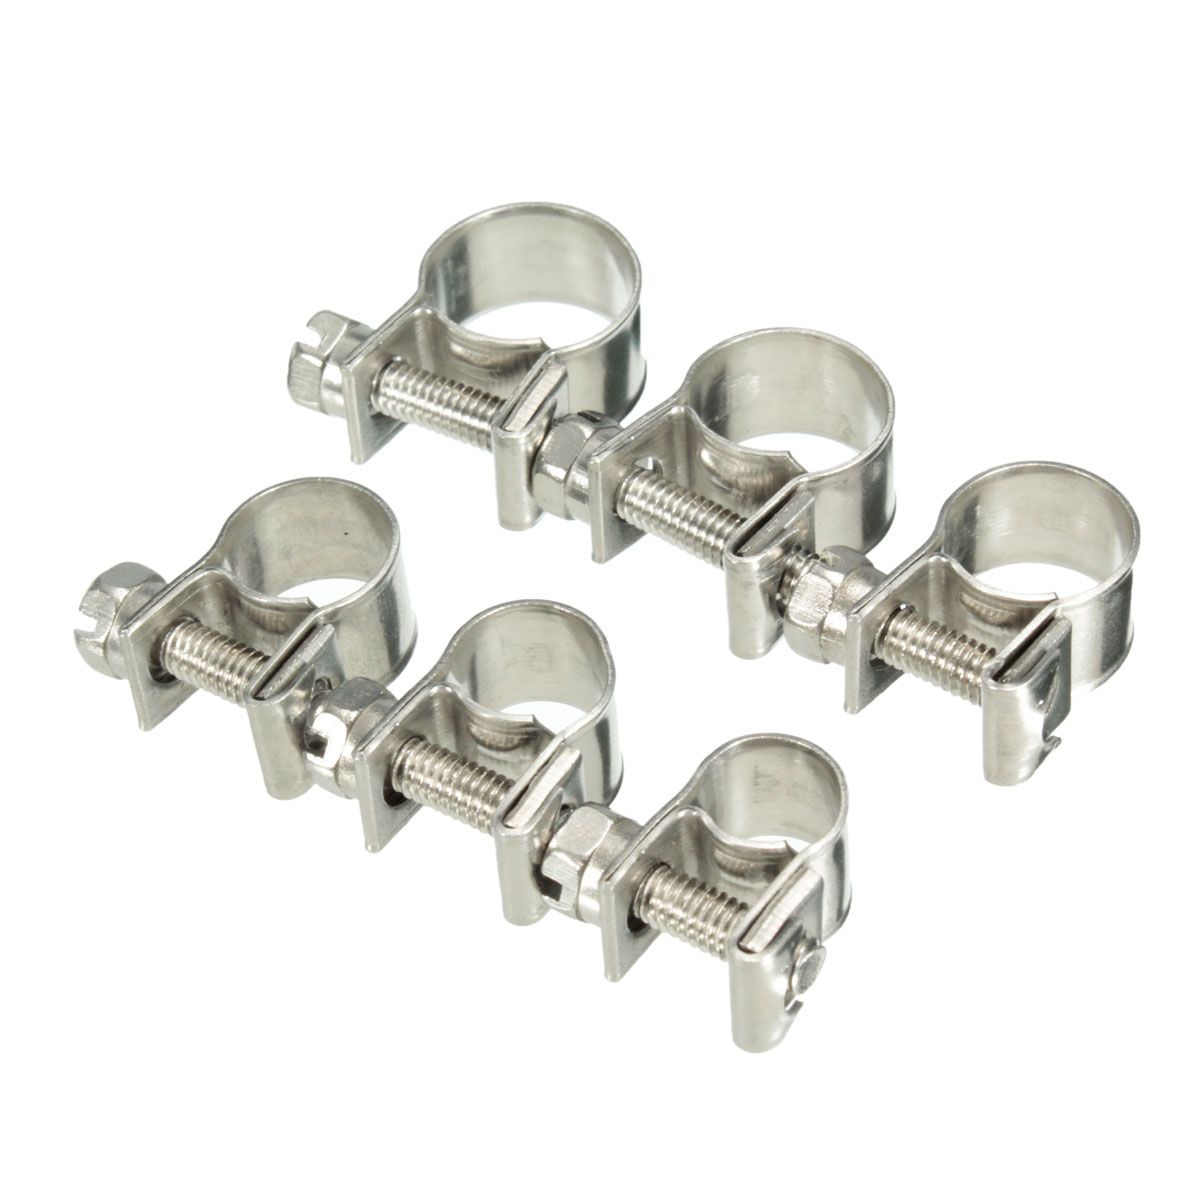 6mm-13mm-Stainless-Steel-Mini-Hose-Clip-Clamp-for-Fuel-Line-Pipe-Petrol-Pipe-1307209